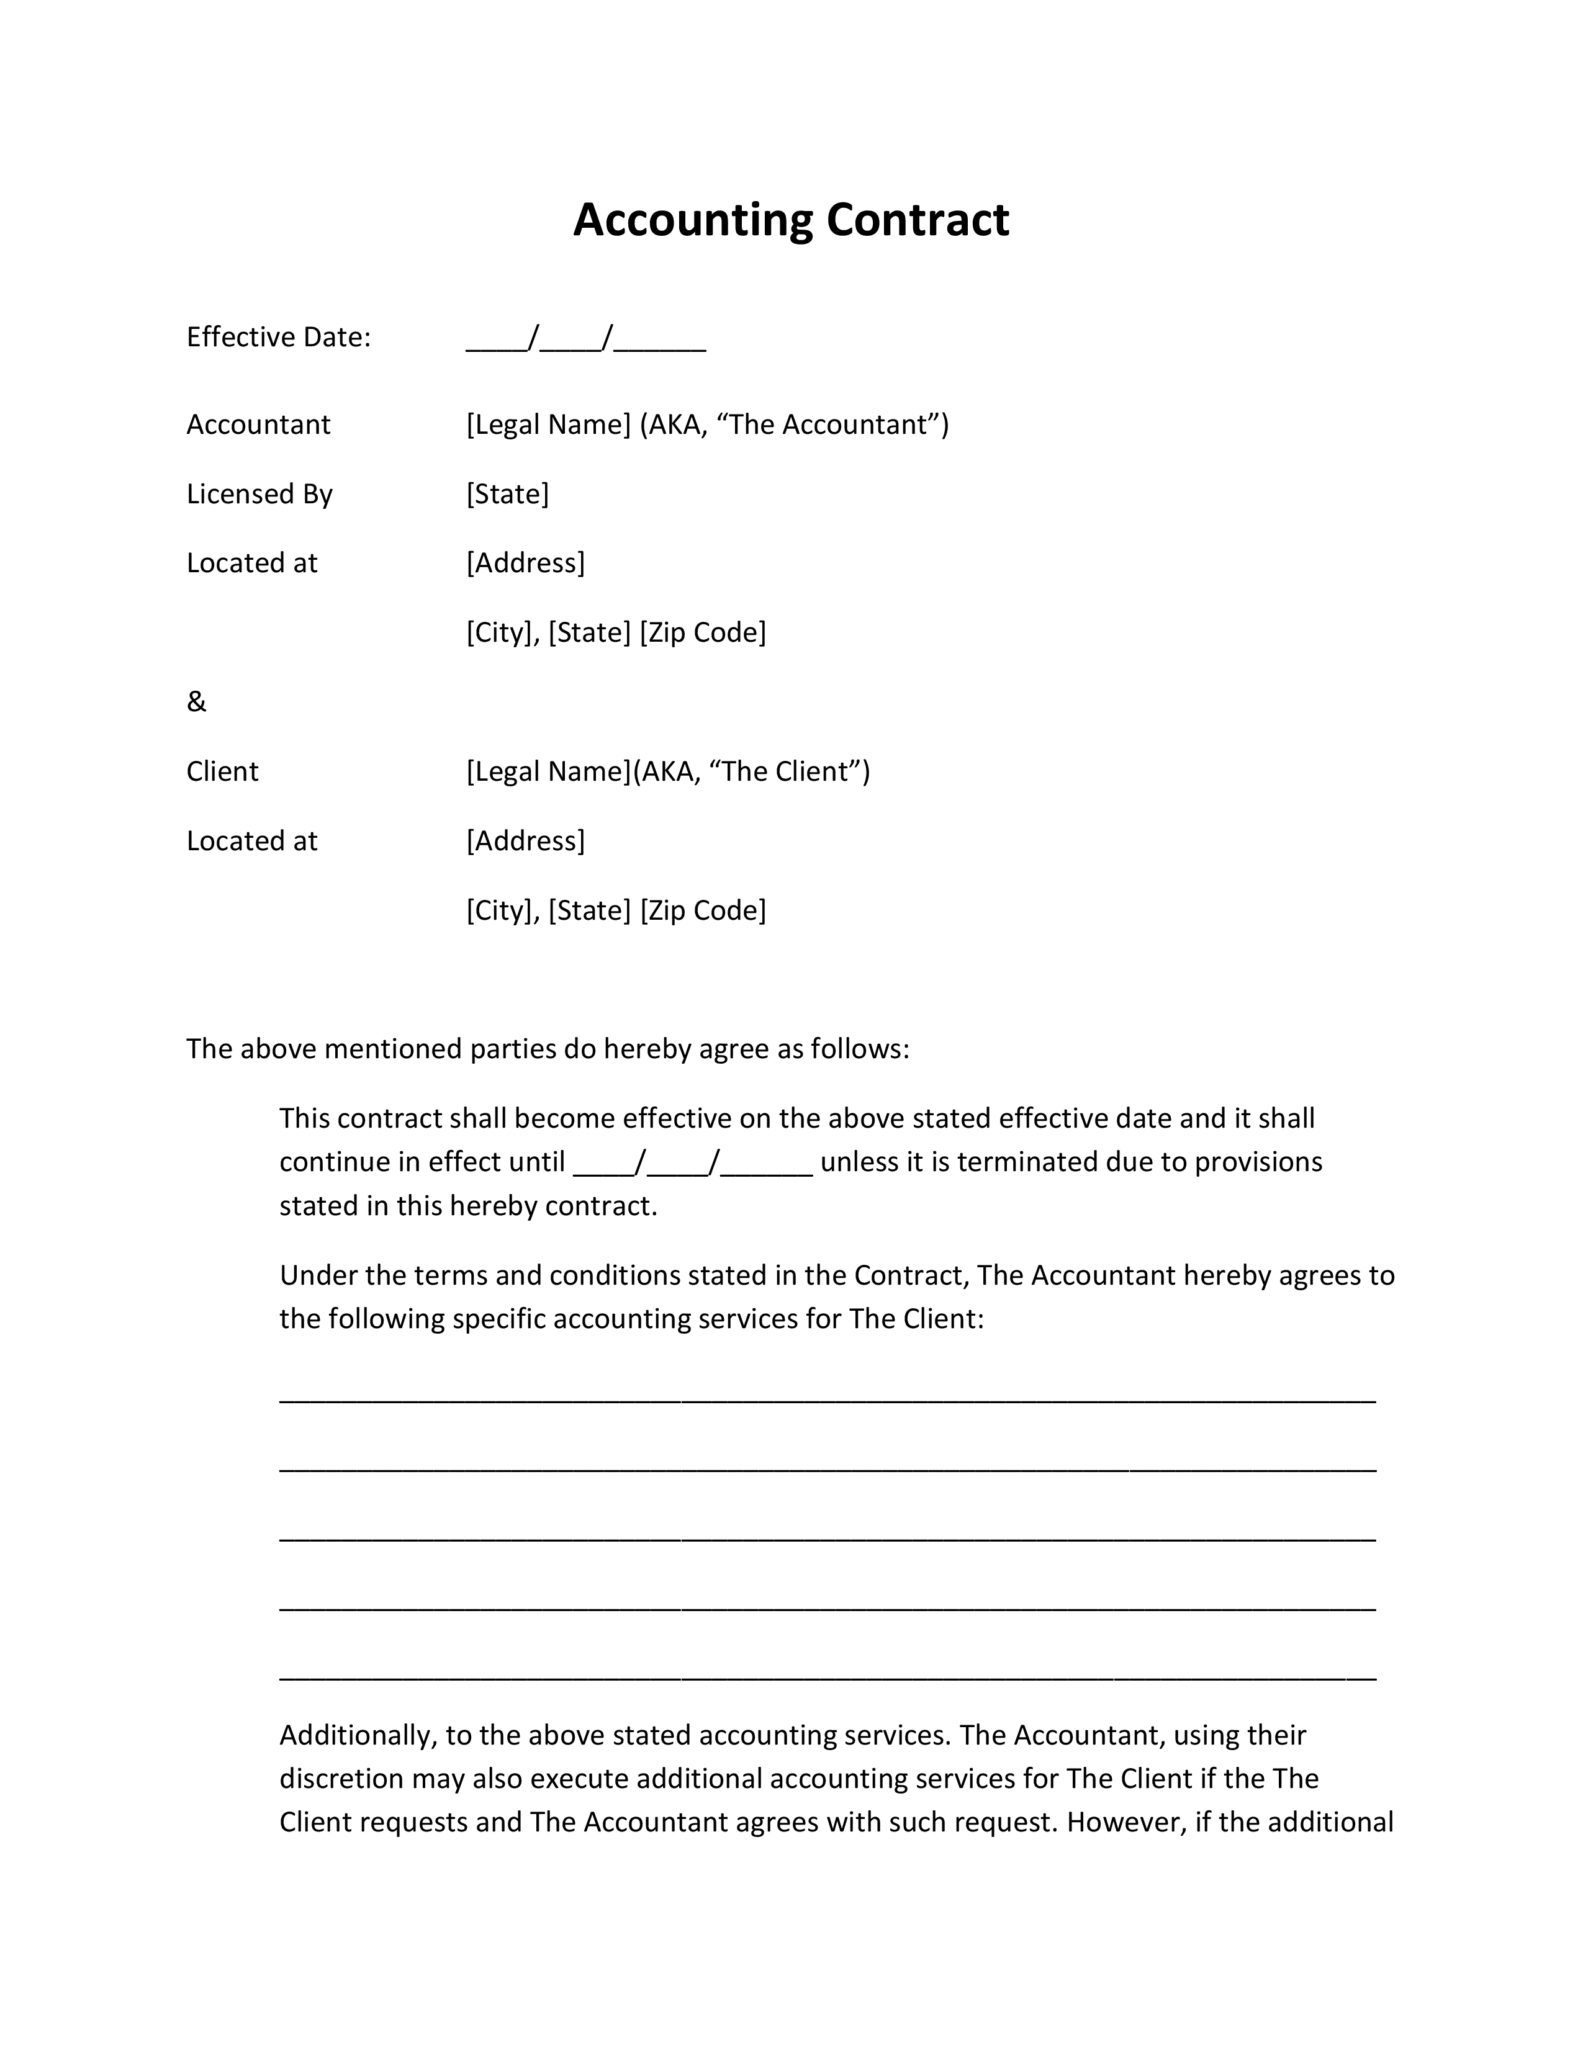 Accounting Service Agreement